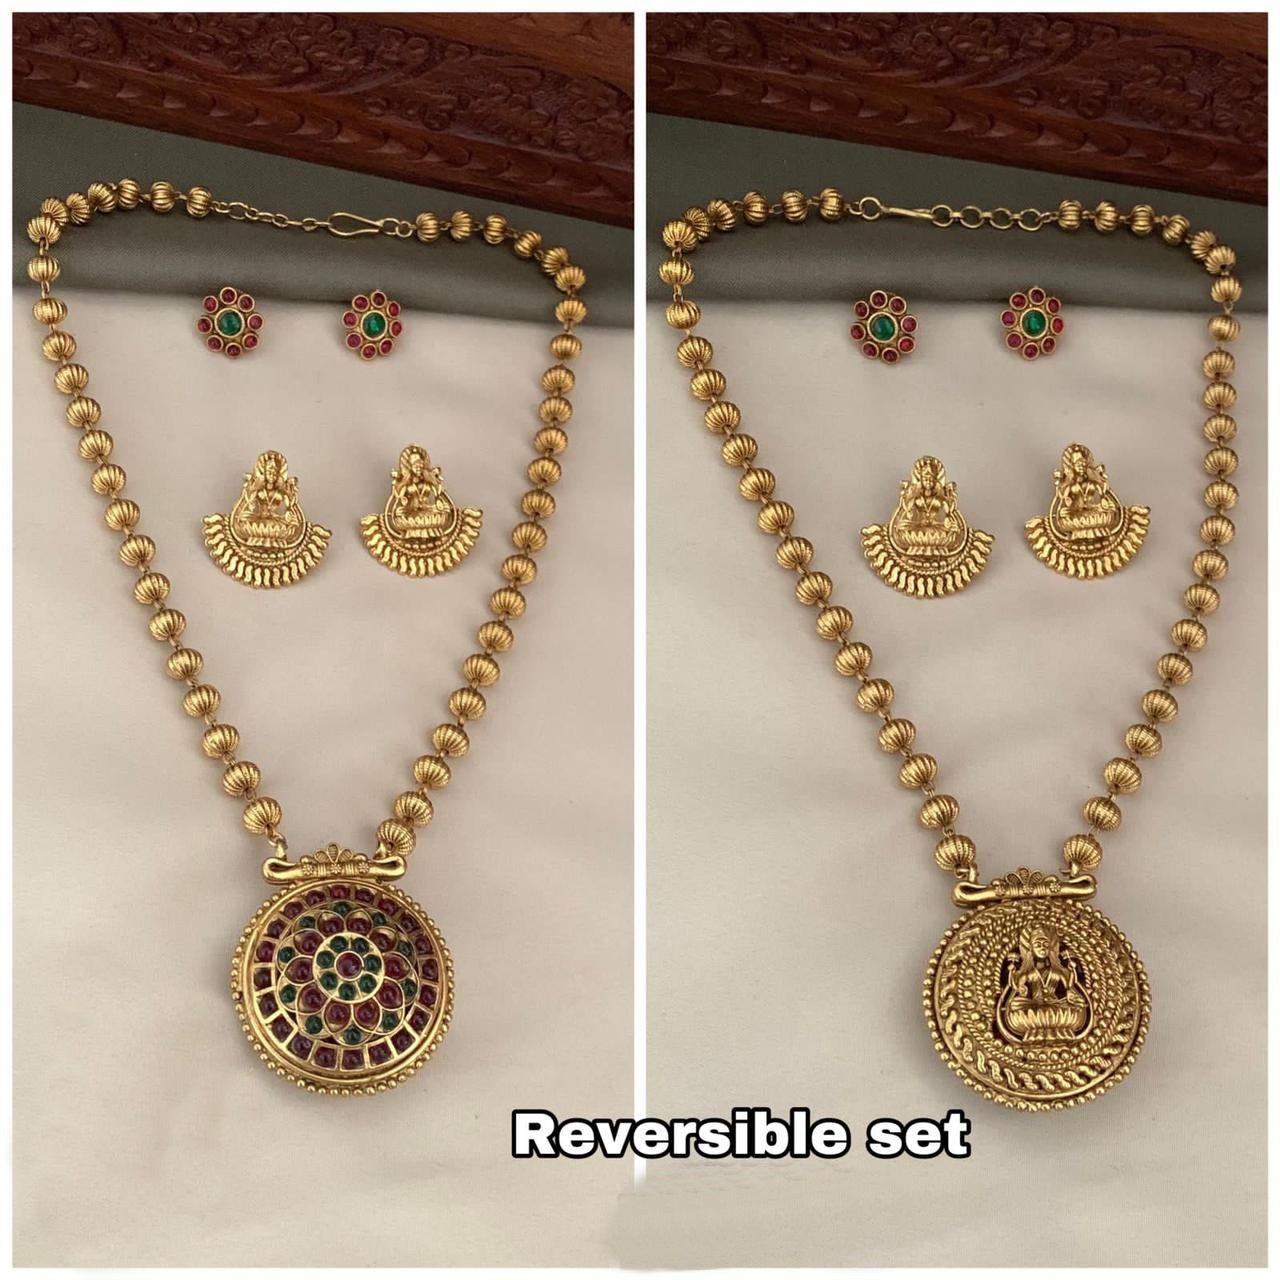 Reversible Pendant Set with AD Stones 22124N